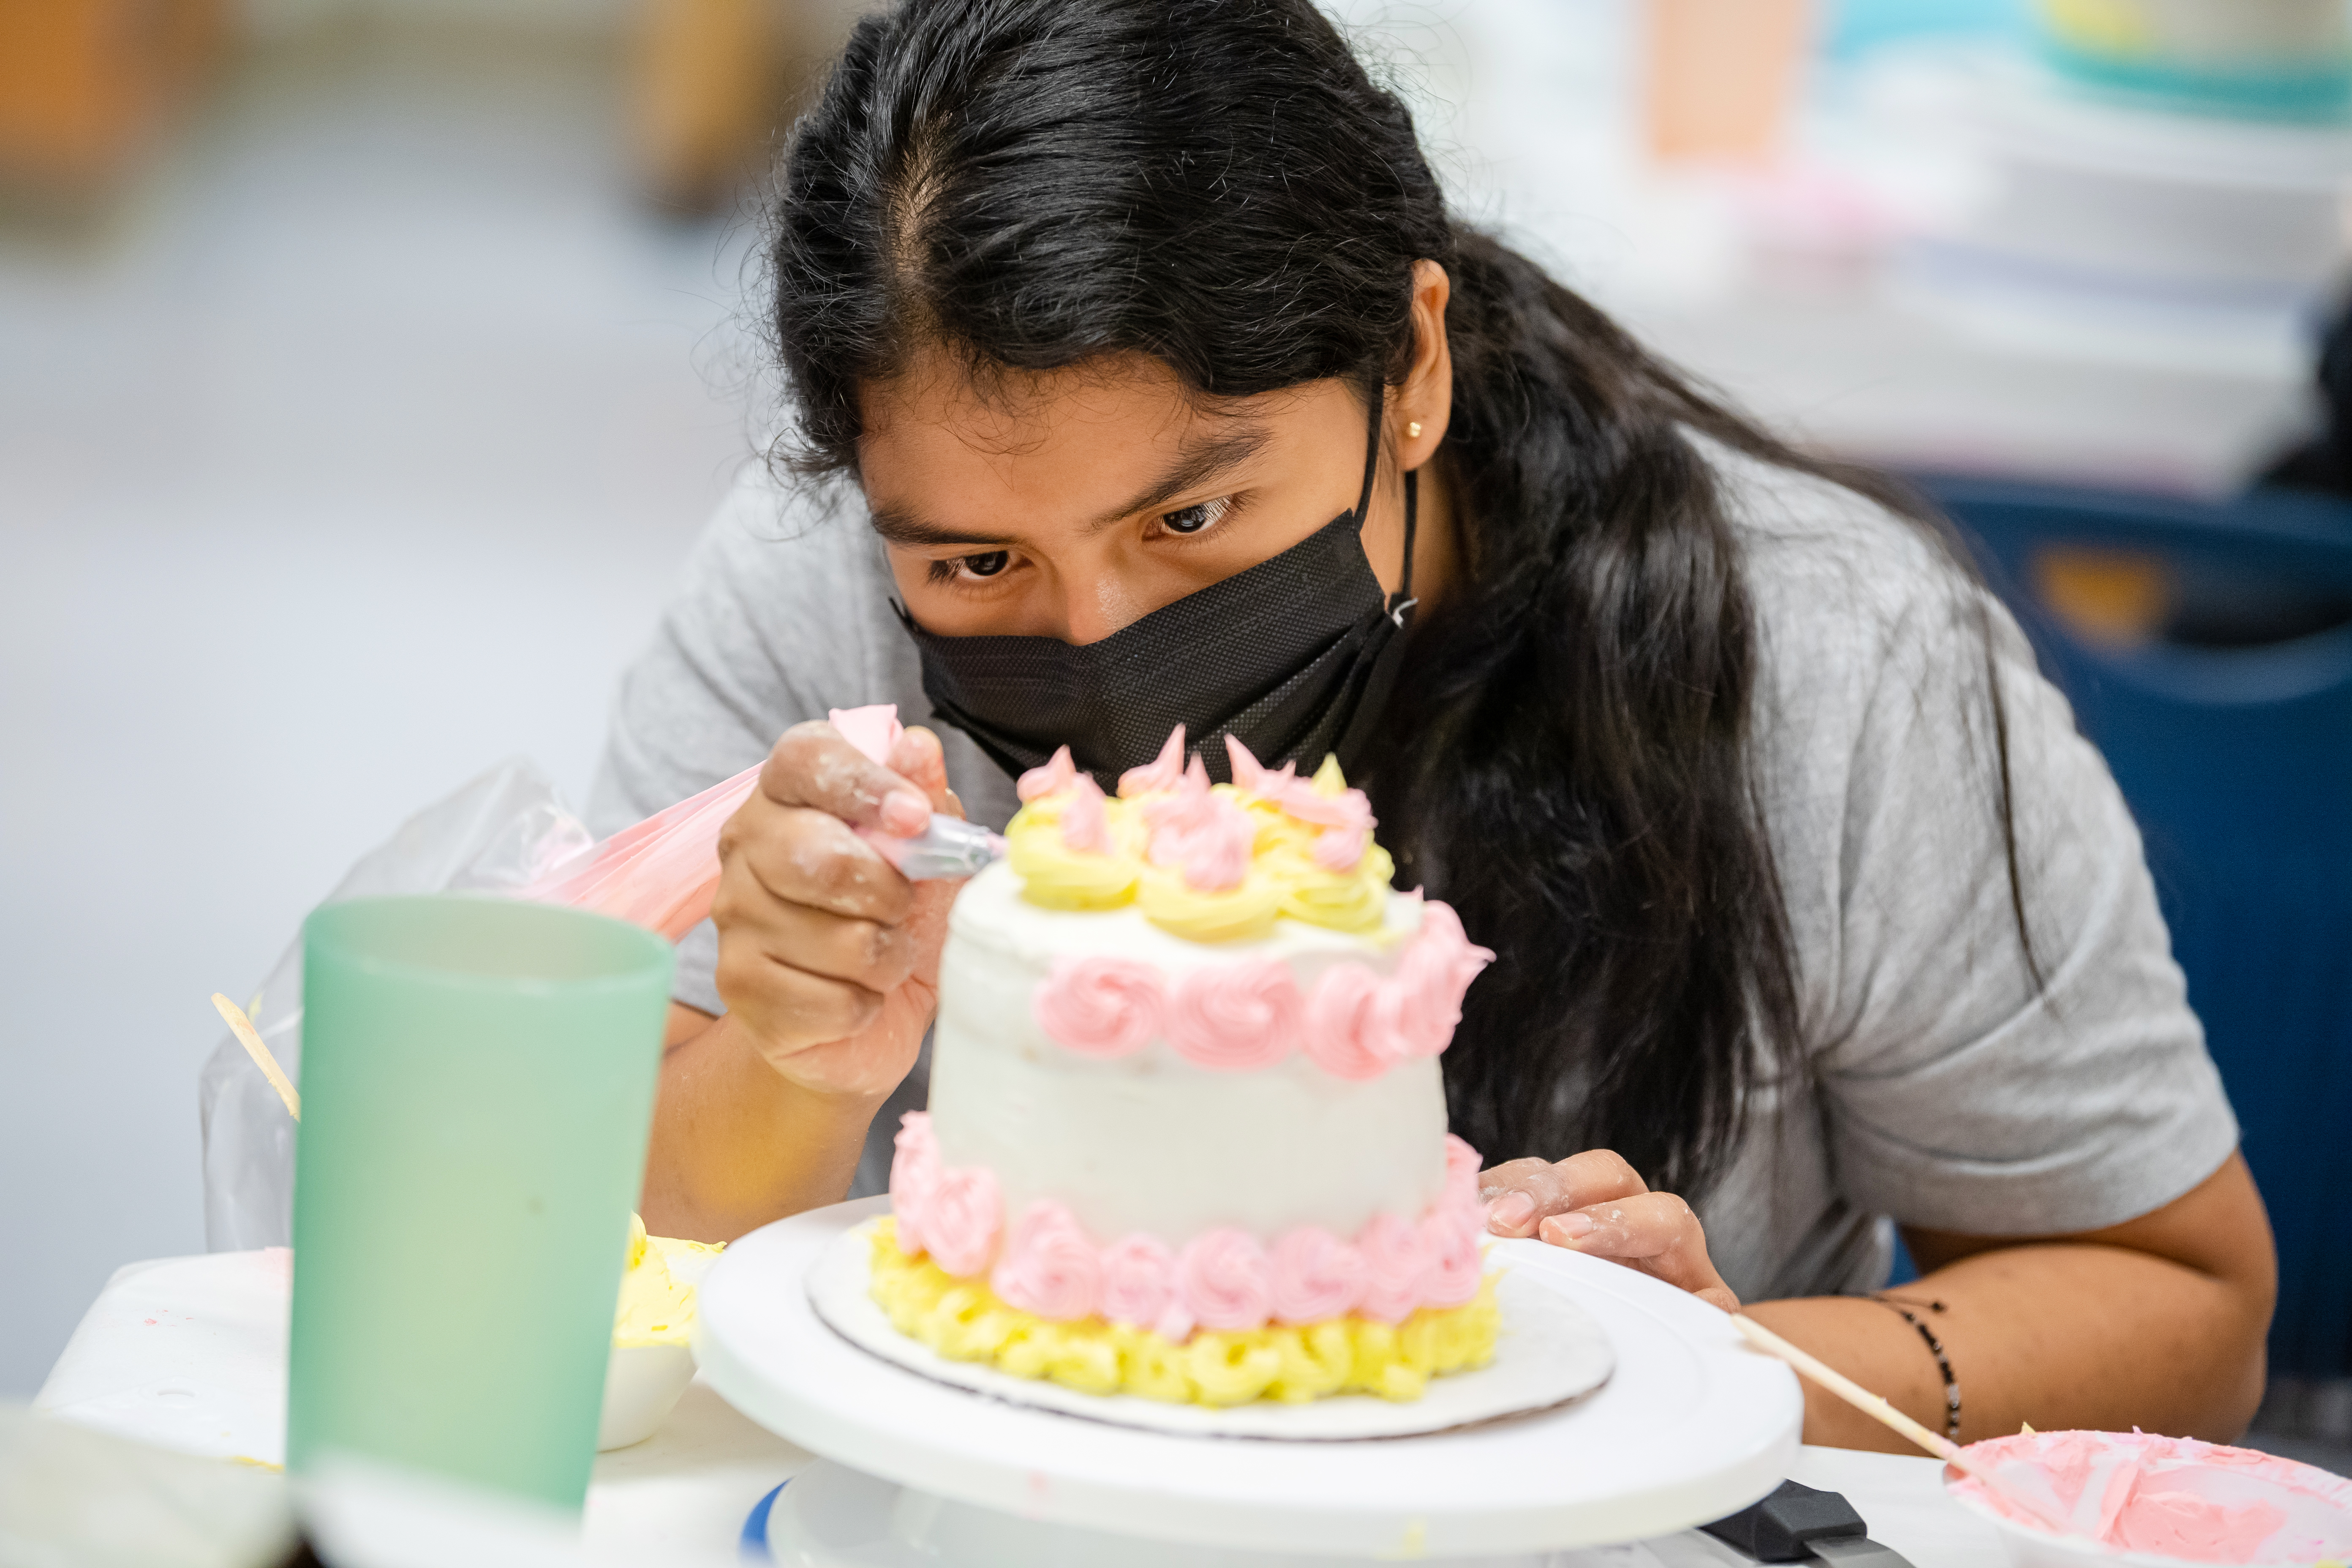 A "Modern Buttercream Techniques" student practices putting roses on a cake.